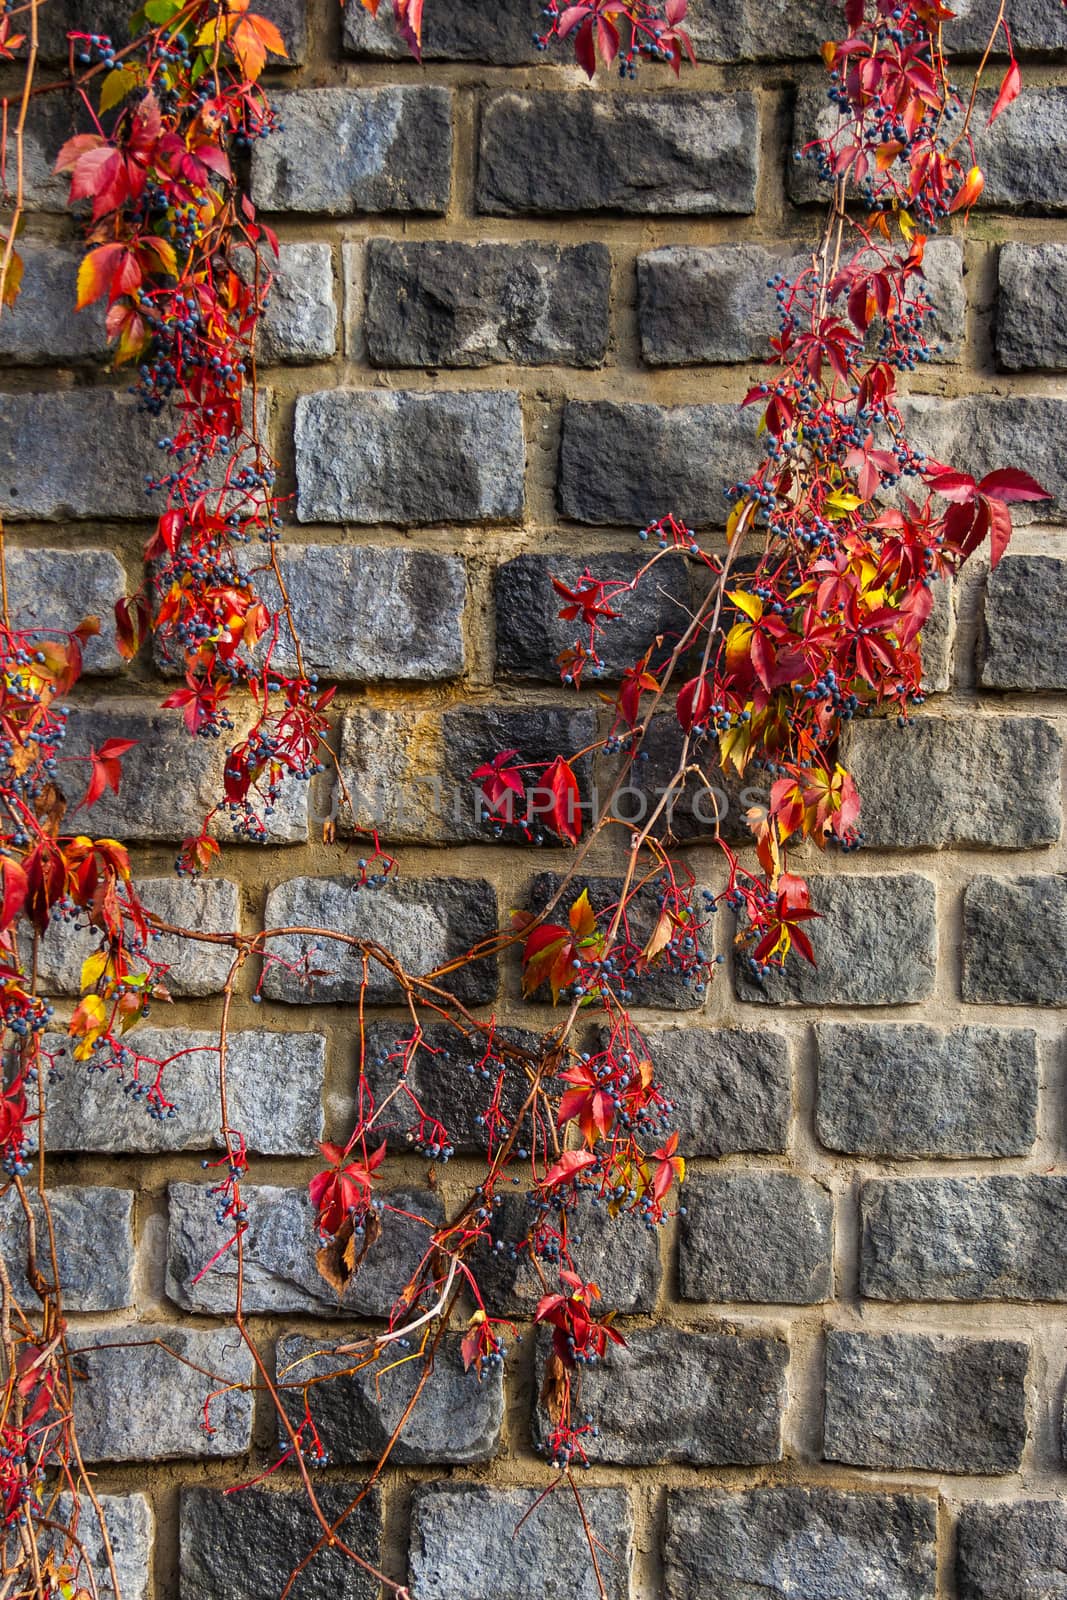 Old stone wall neatly laid with red foliage winds with dark blue berries